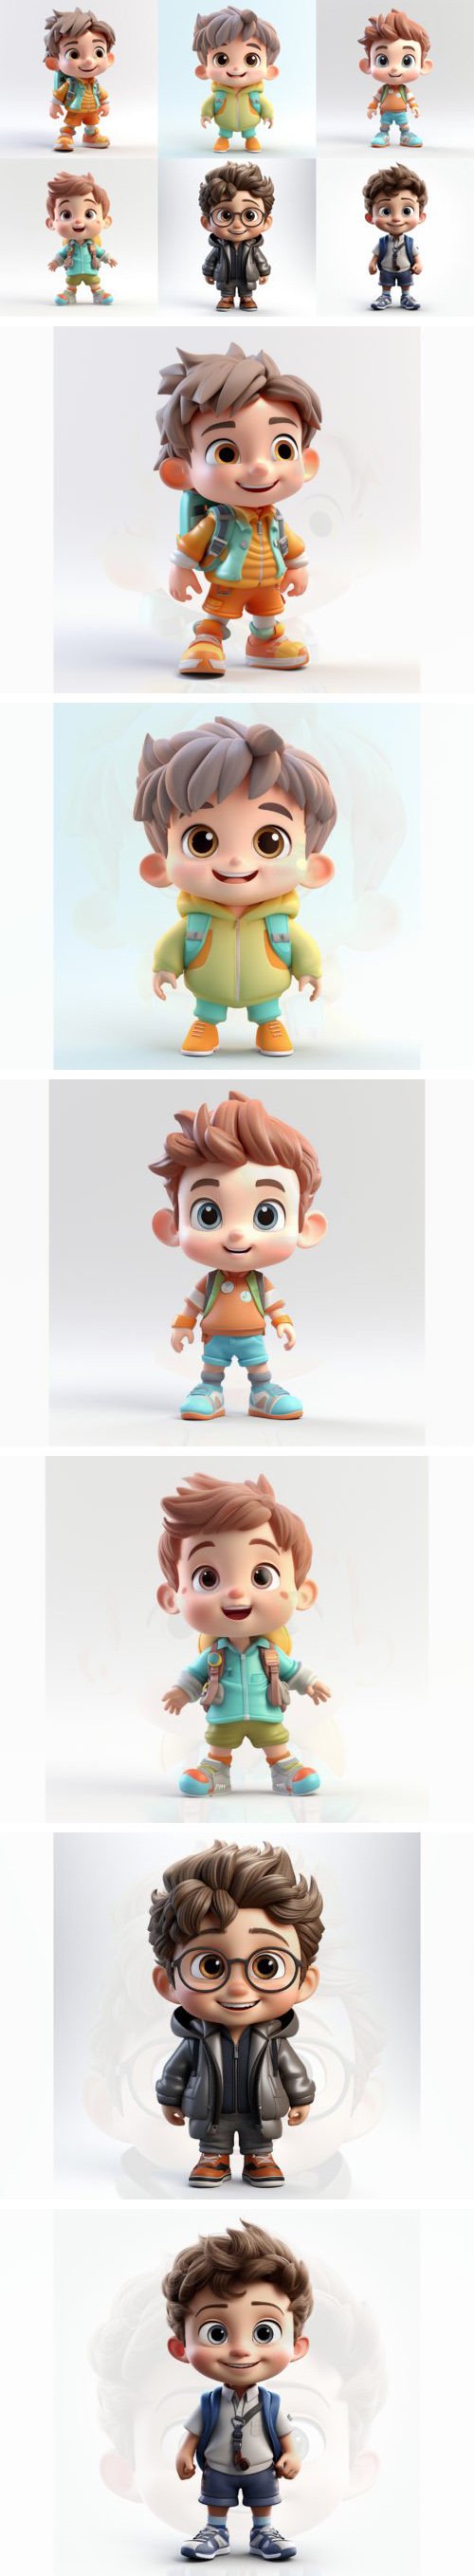 Adorable Smart Kids with Charming smiles - 3D Render Collection